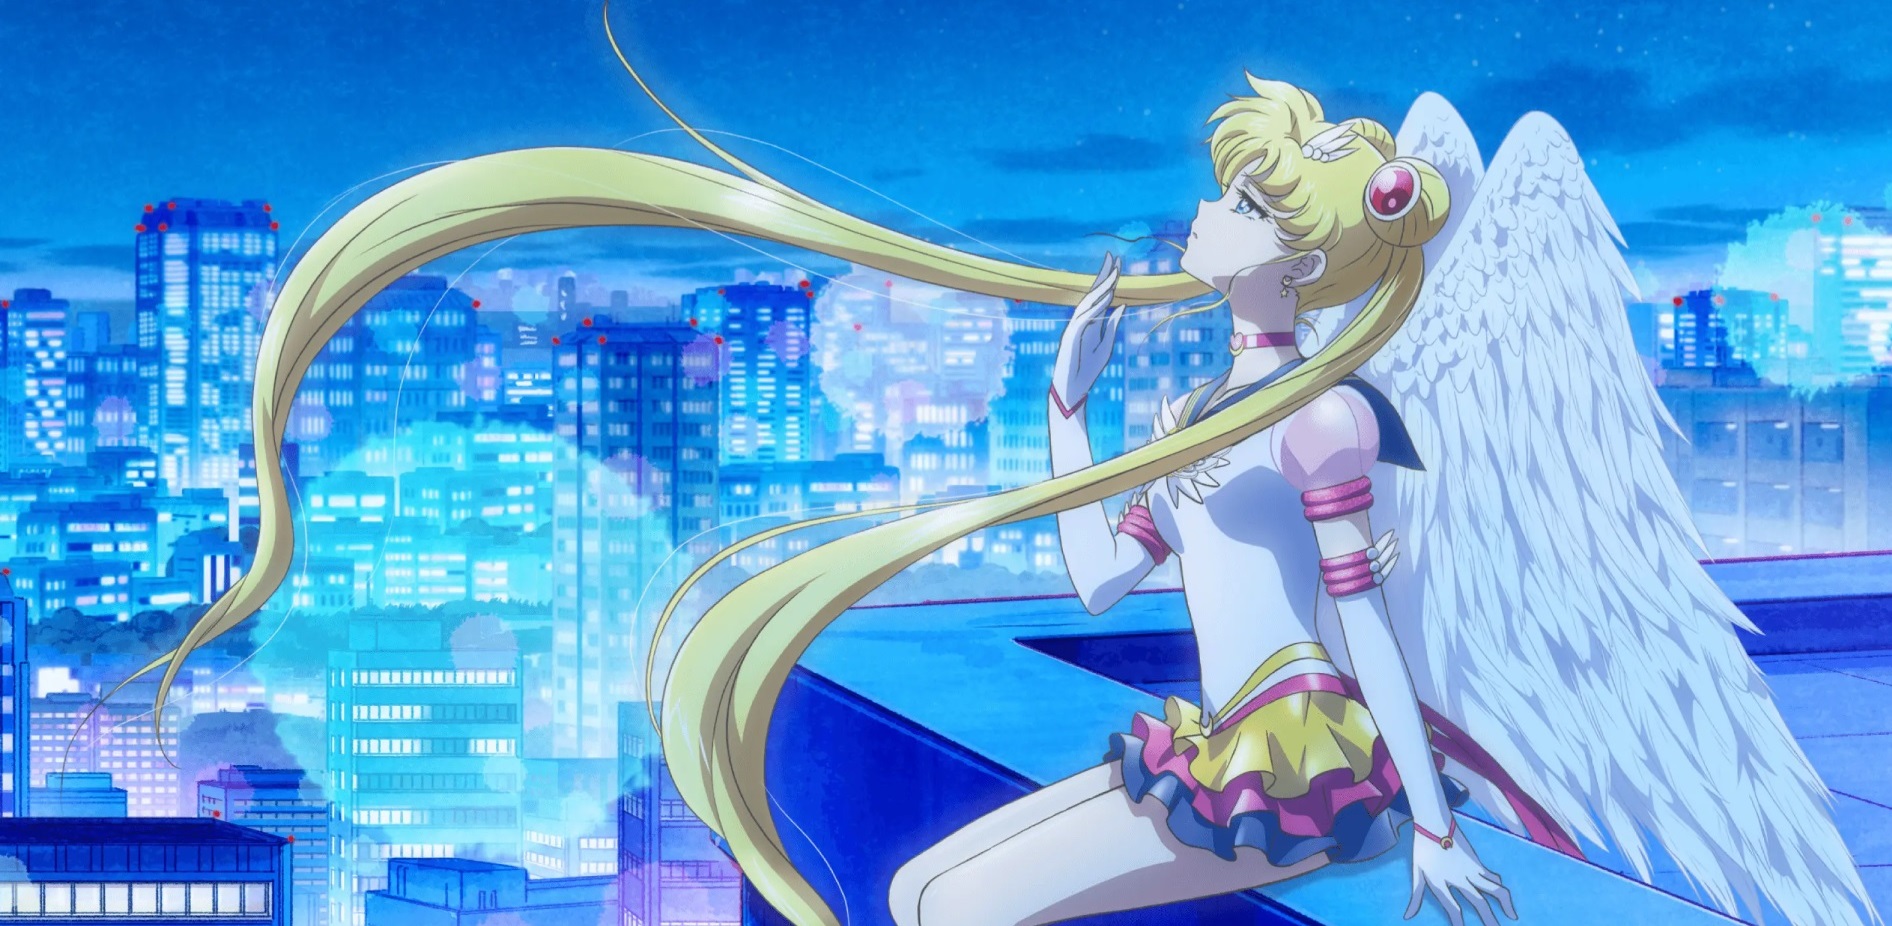 The end of Sailor Moon is coming with new Sailor Moon Cosmos theatrical